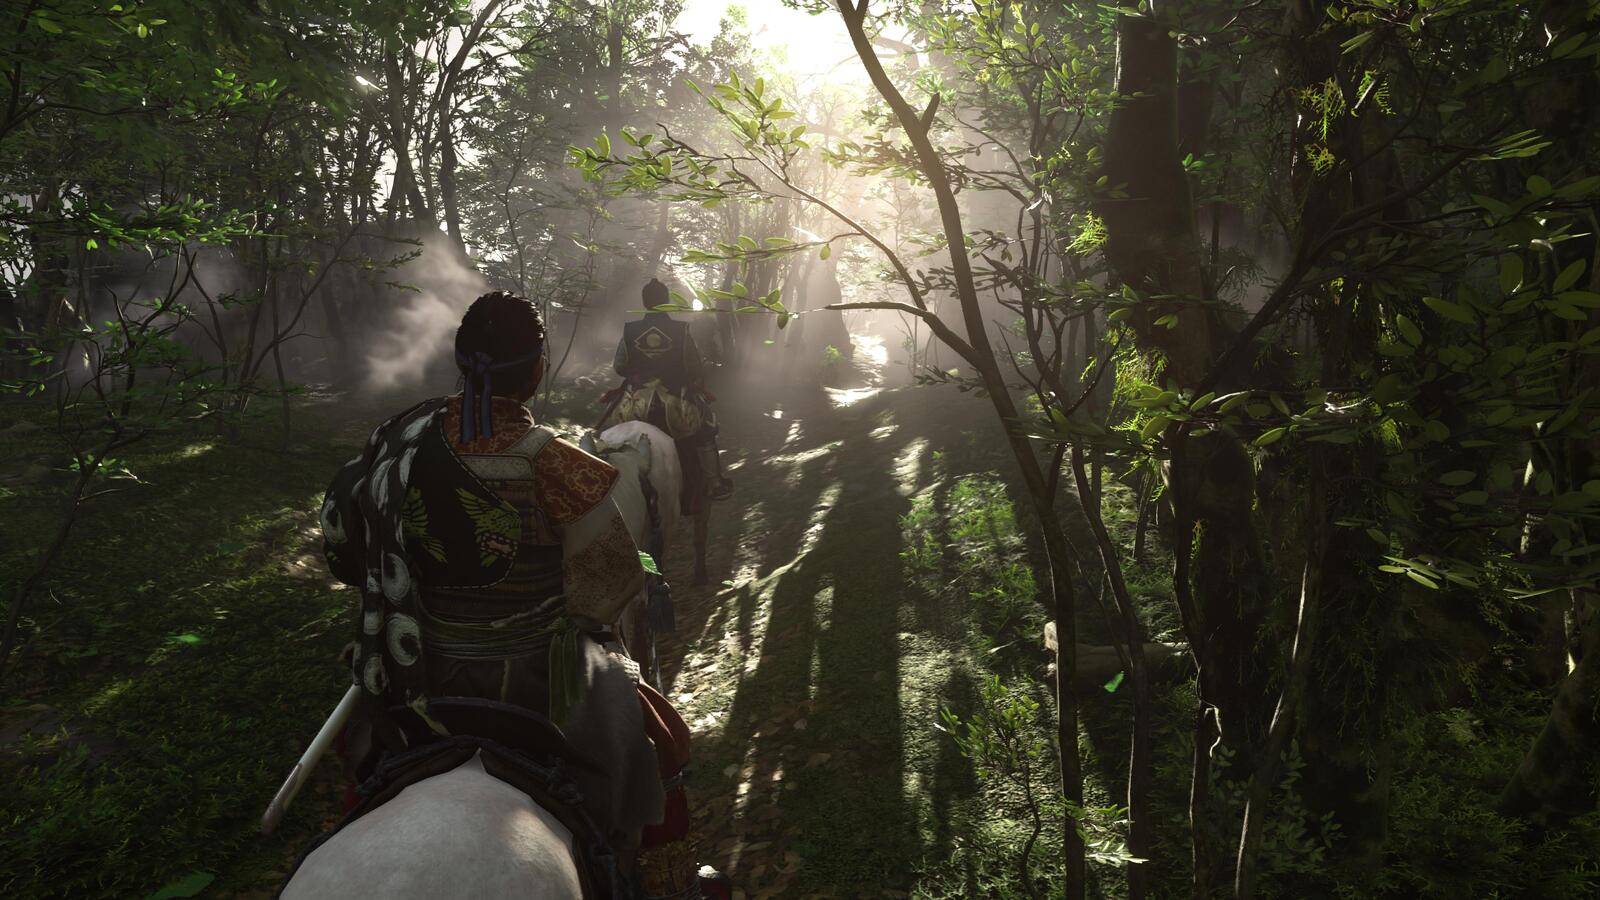 Two characters riding through a forest on horseback